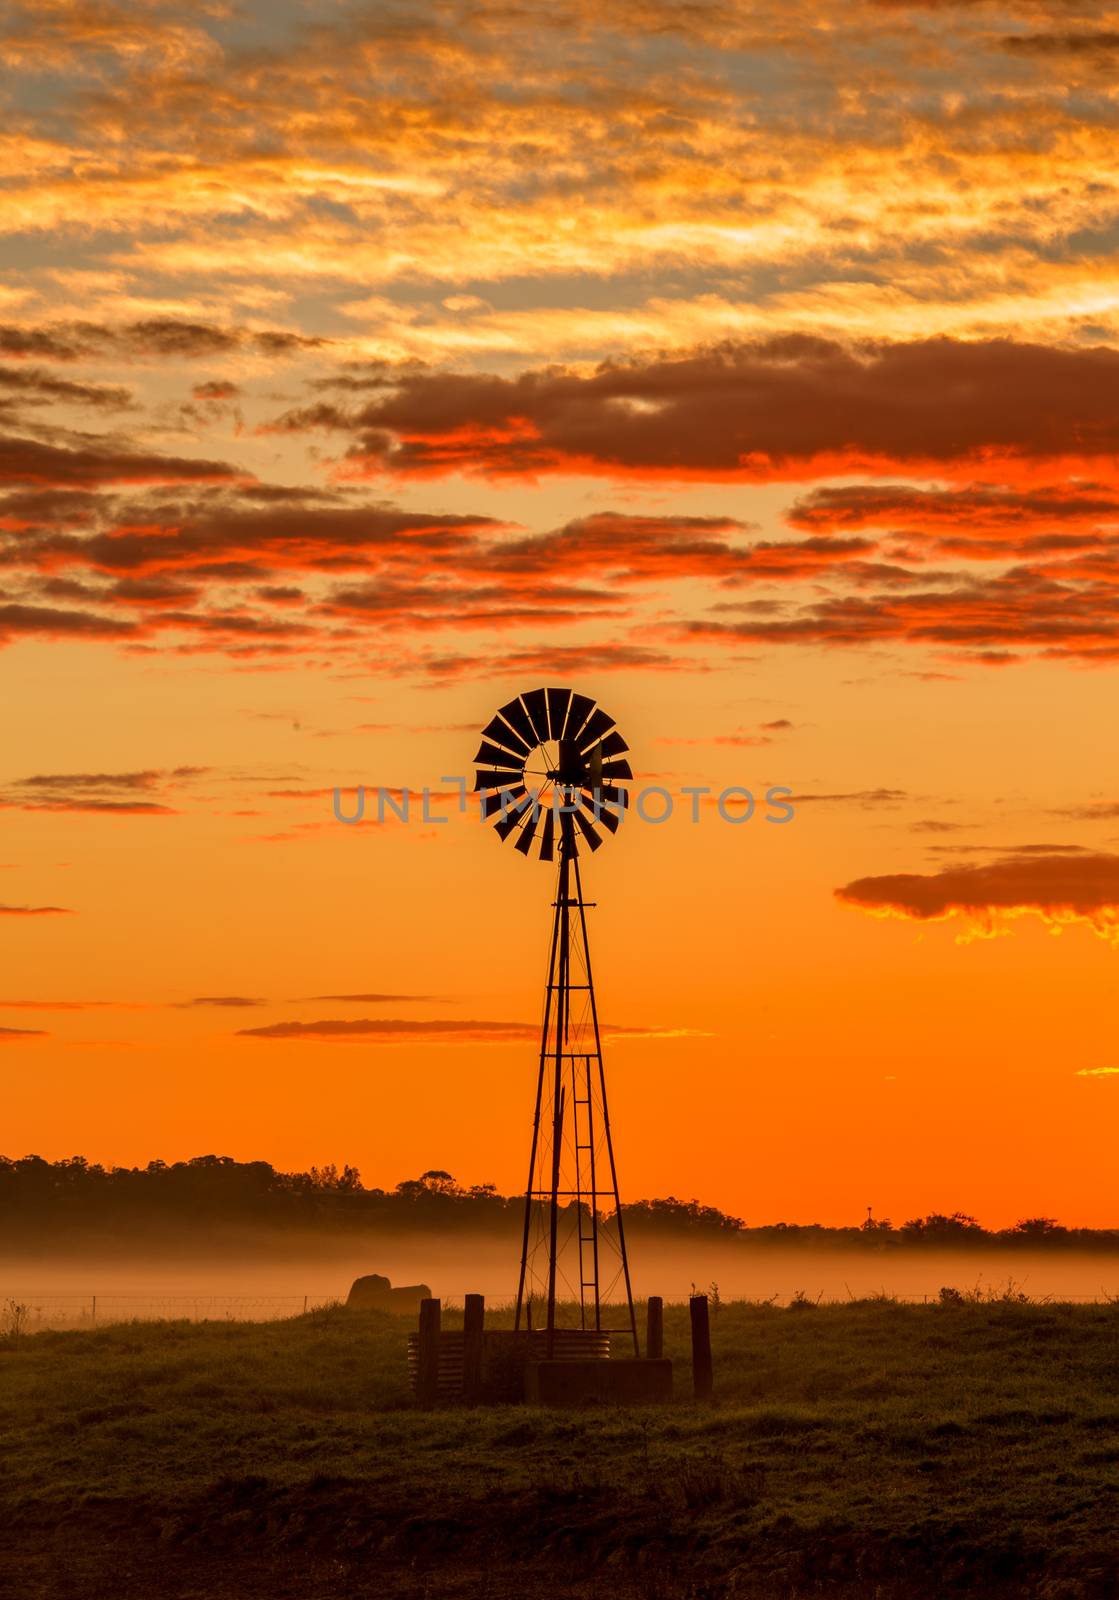 Misty mornings and rich colourful sunrises across rural farmland fields with old rustic windmill